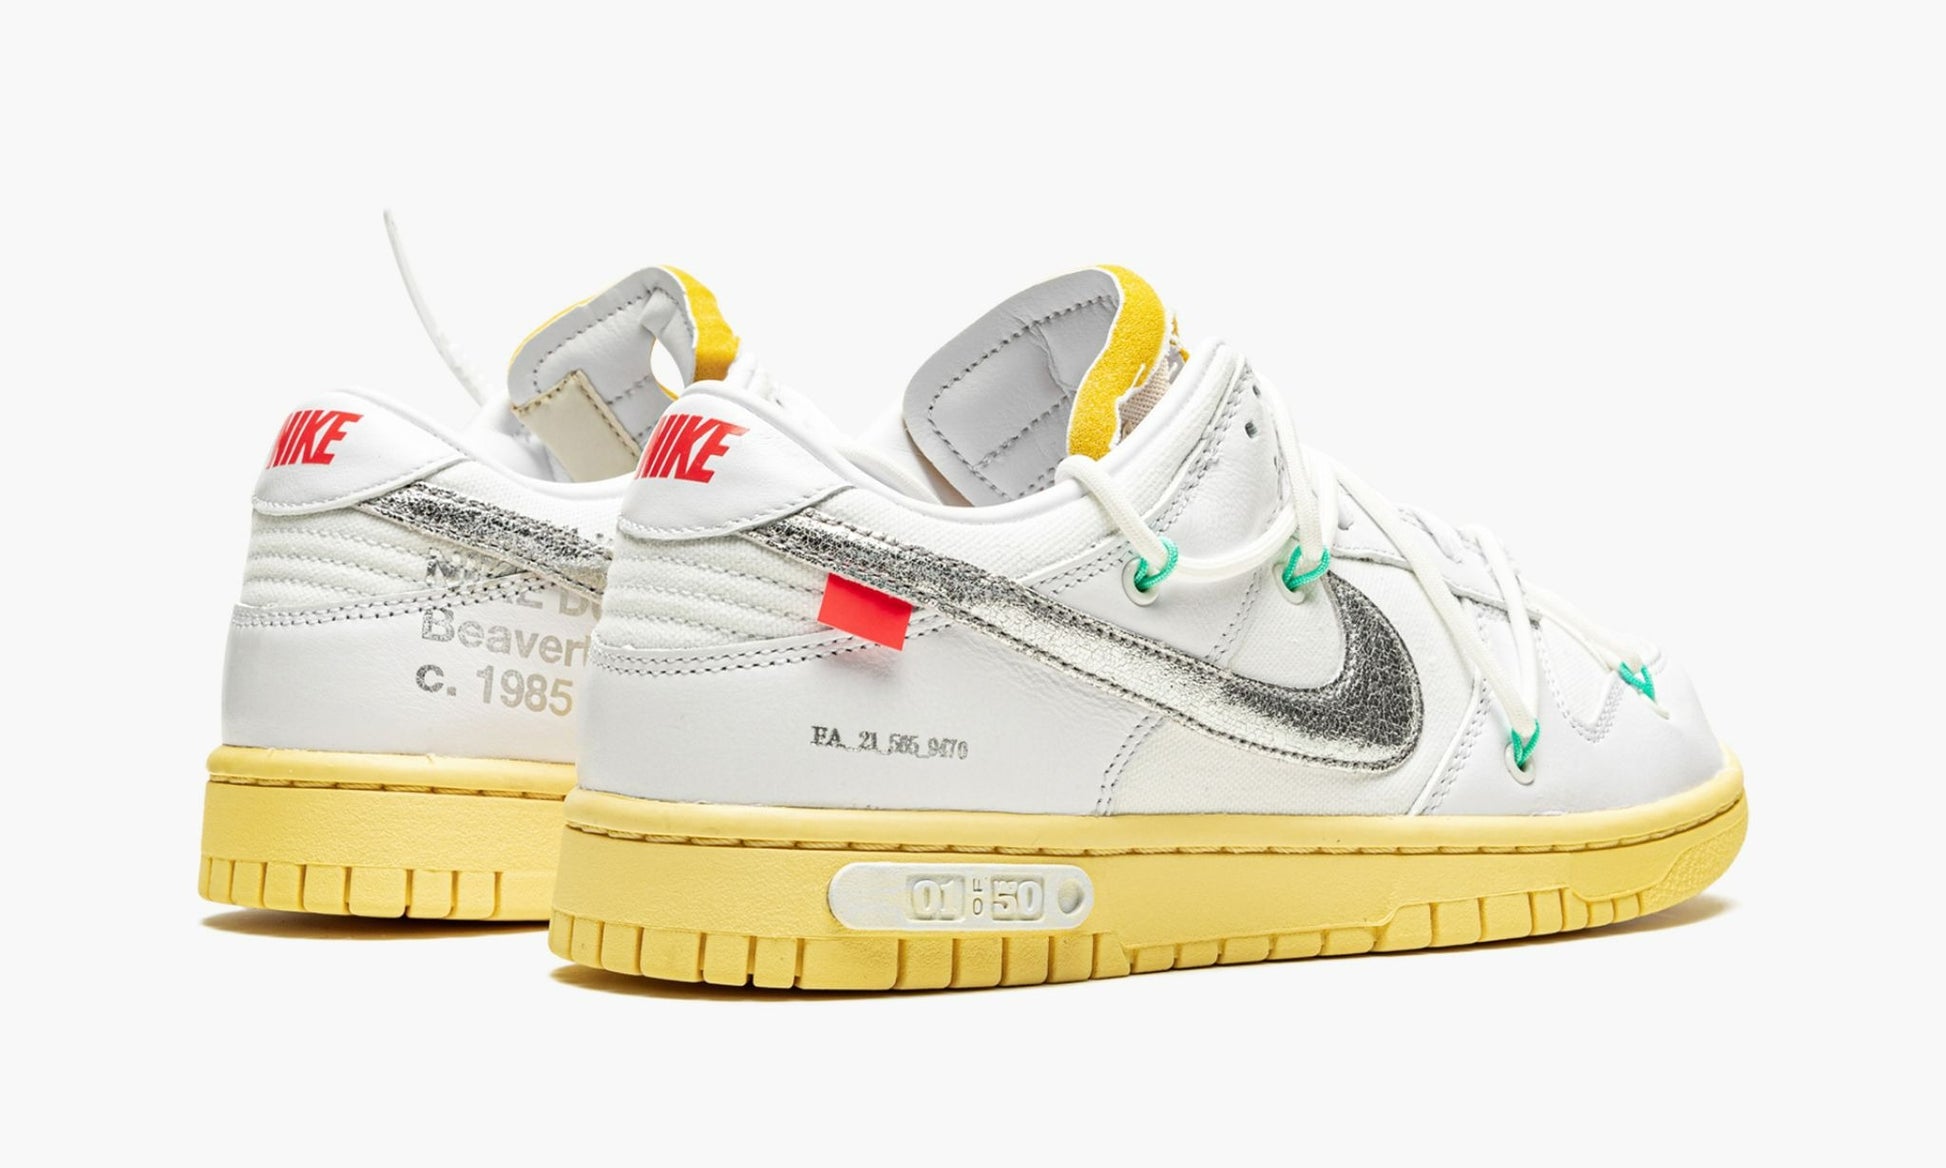 Off-White x Dunk Low 'Lot 01 of 50' DM1602-127